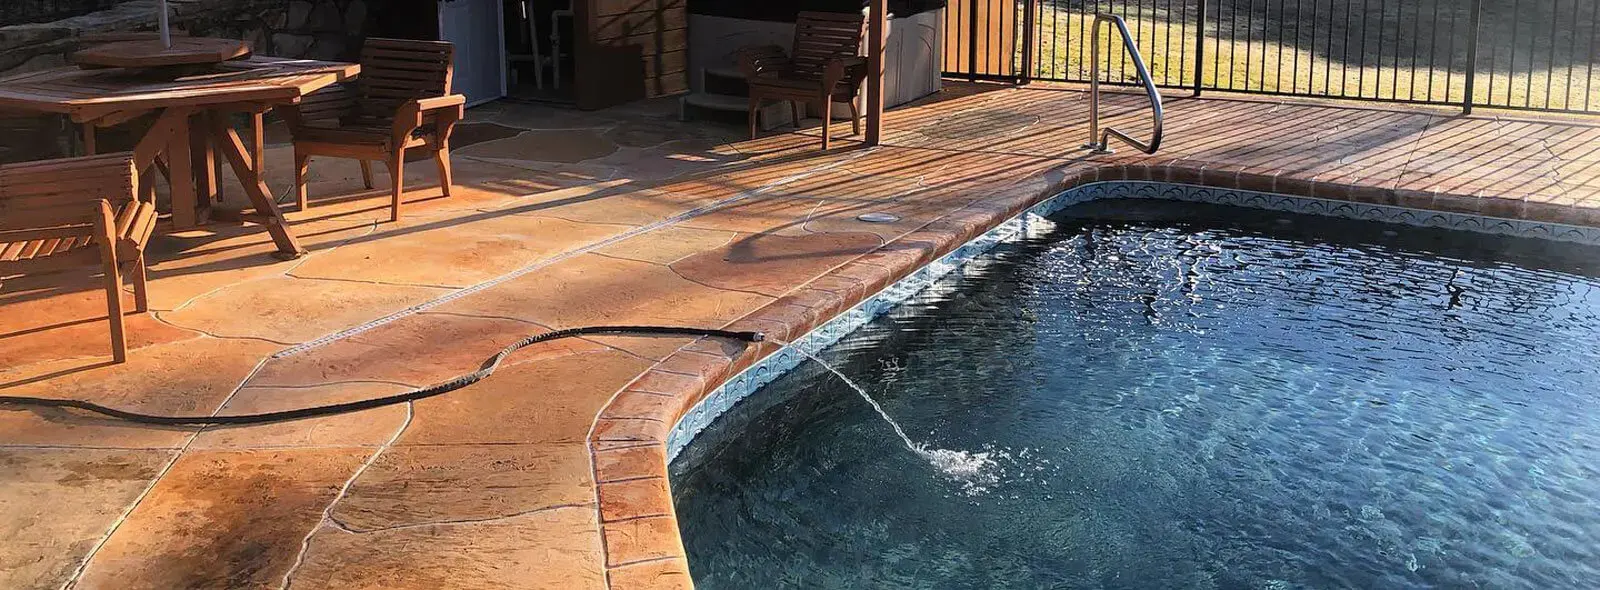 Commercial Pool Service for Business Owner & Property Manager